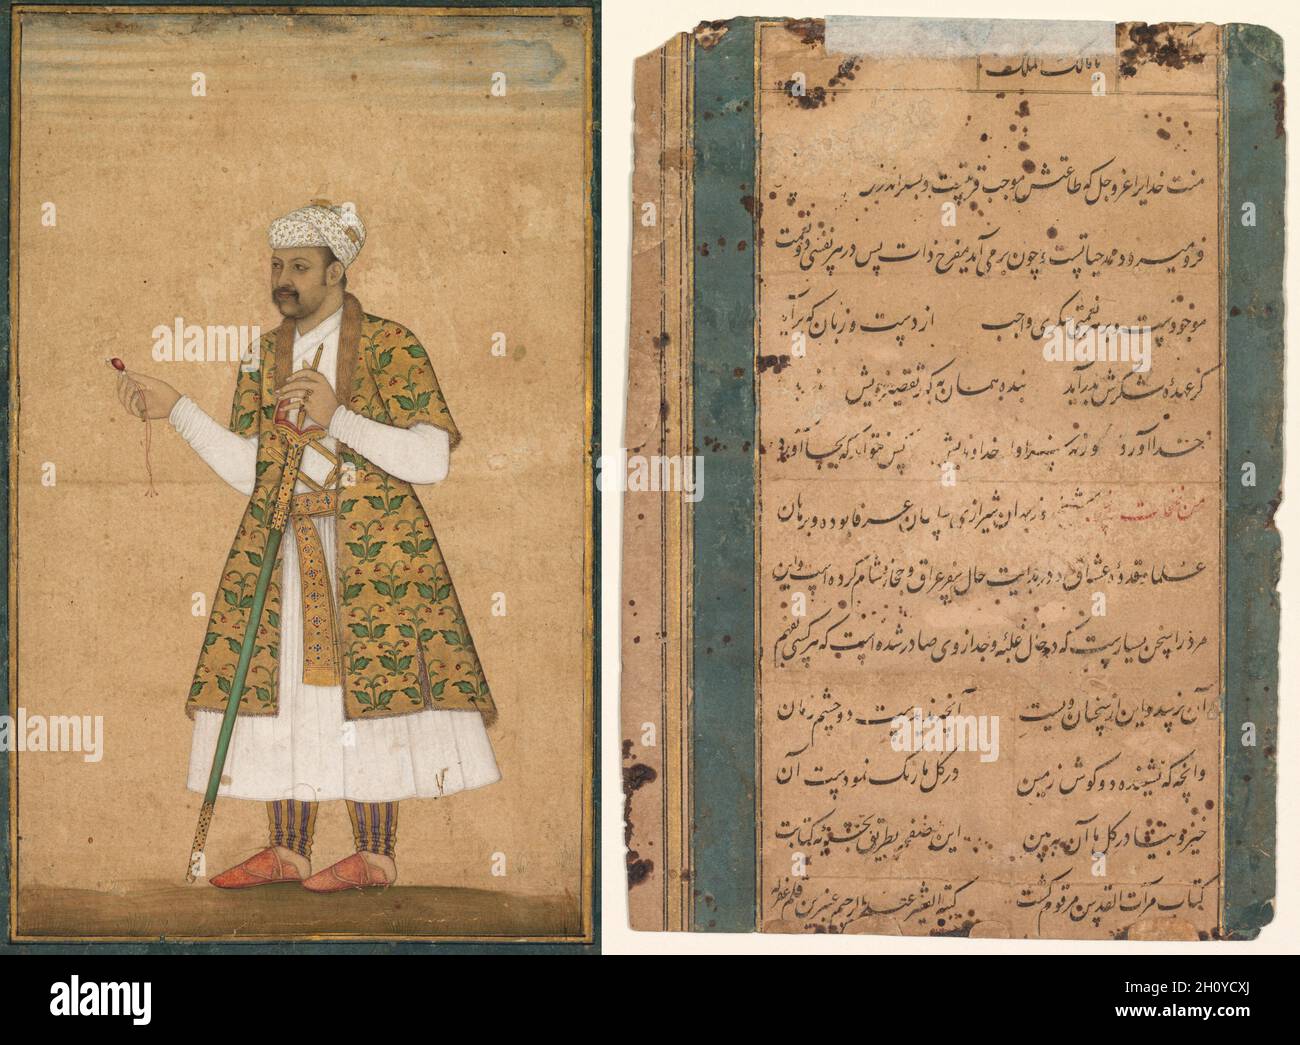 A Courtier, Possibly Khan Alam, Holding a Spinel and a Deccan Sword, c. 1605–10. Attributed to Govardhan (Indian, active c.1596-1645). Gum tempera, ink, and gold on paper, text on verso; page: 17.8 x 12.5 cm (7 x 4 15/16 in.).  According to Akbar's court historian, the emperor ordered likenesses to be taken of the grandees of his realm. 'An immense album was thus formed: those that have passed away have received a new life, and those who are still alive have immortality promised them.' Akbar's son and successor, Jahangir (reigned 1605-27), continued the tradition of commissioning works of life Stock Photo